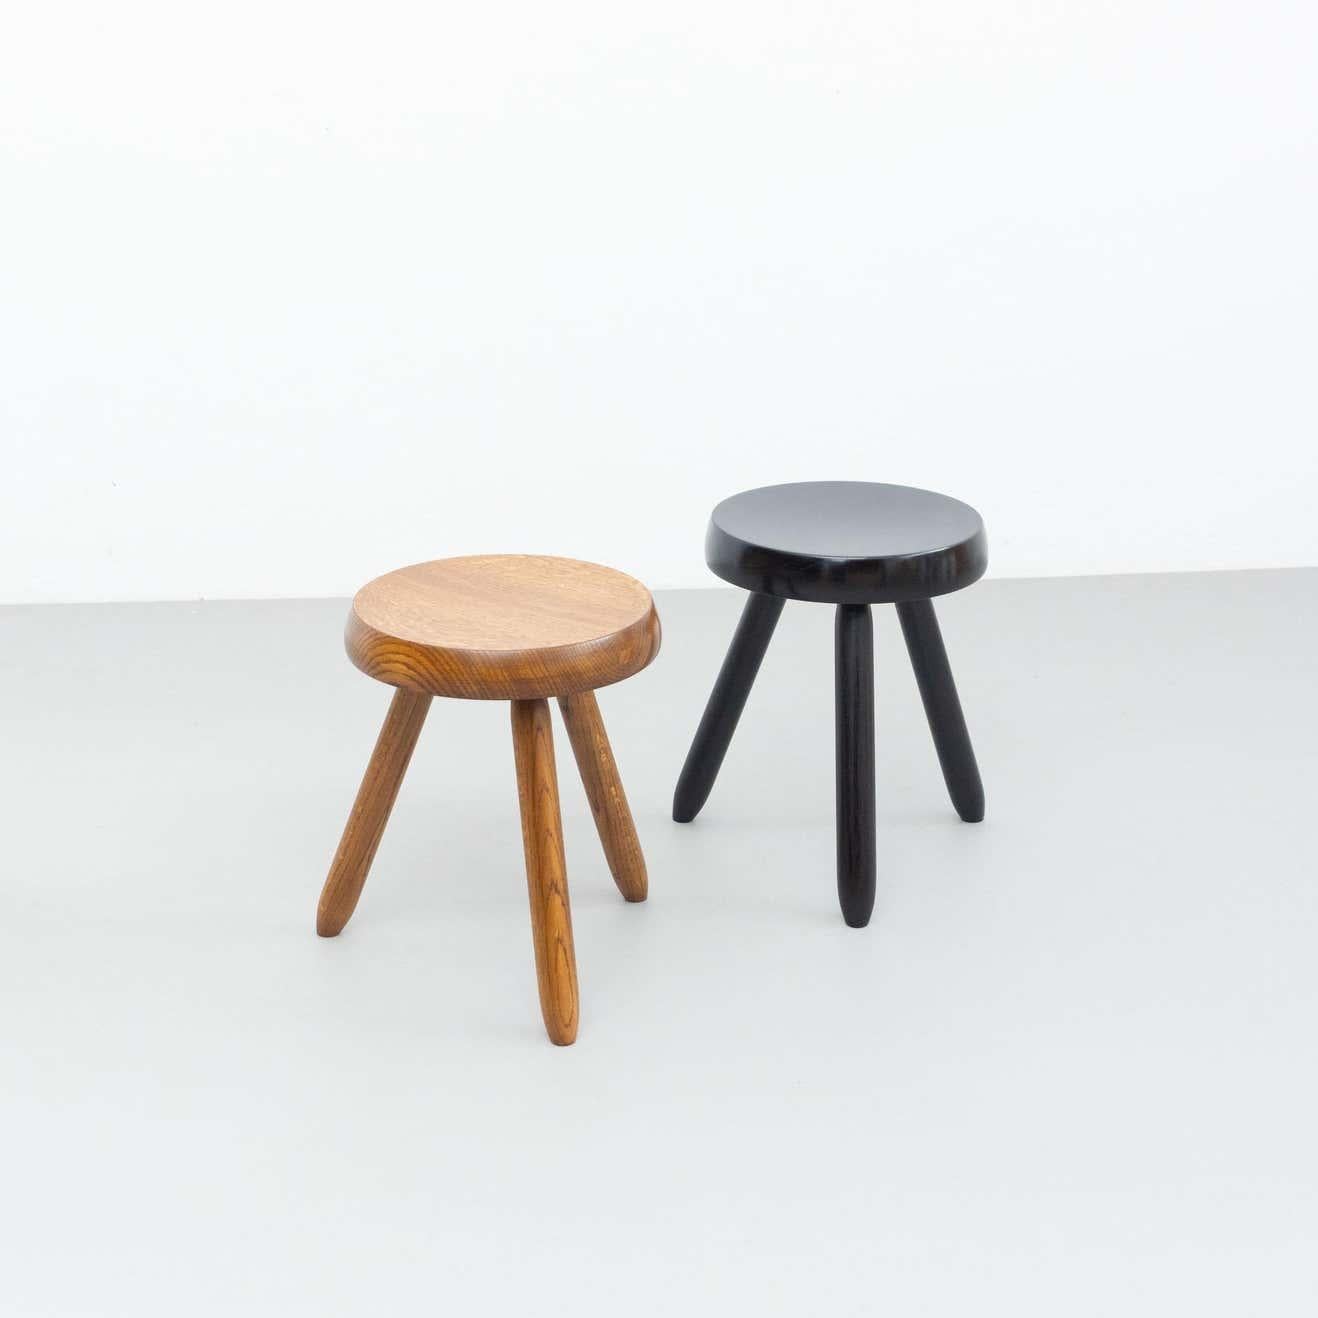 French Mid-Century Modern Set of Two Stools in the Style of Charlotte Perriand